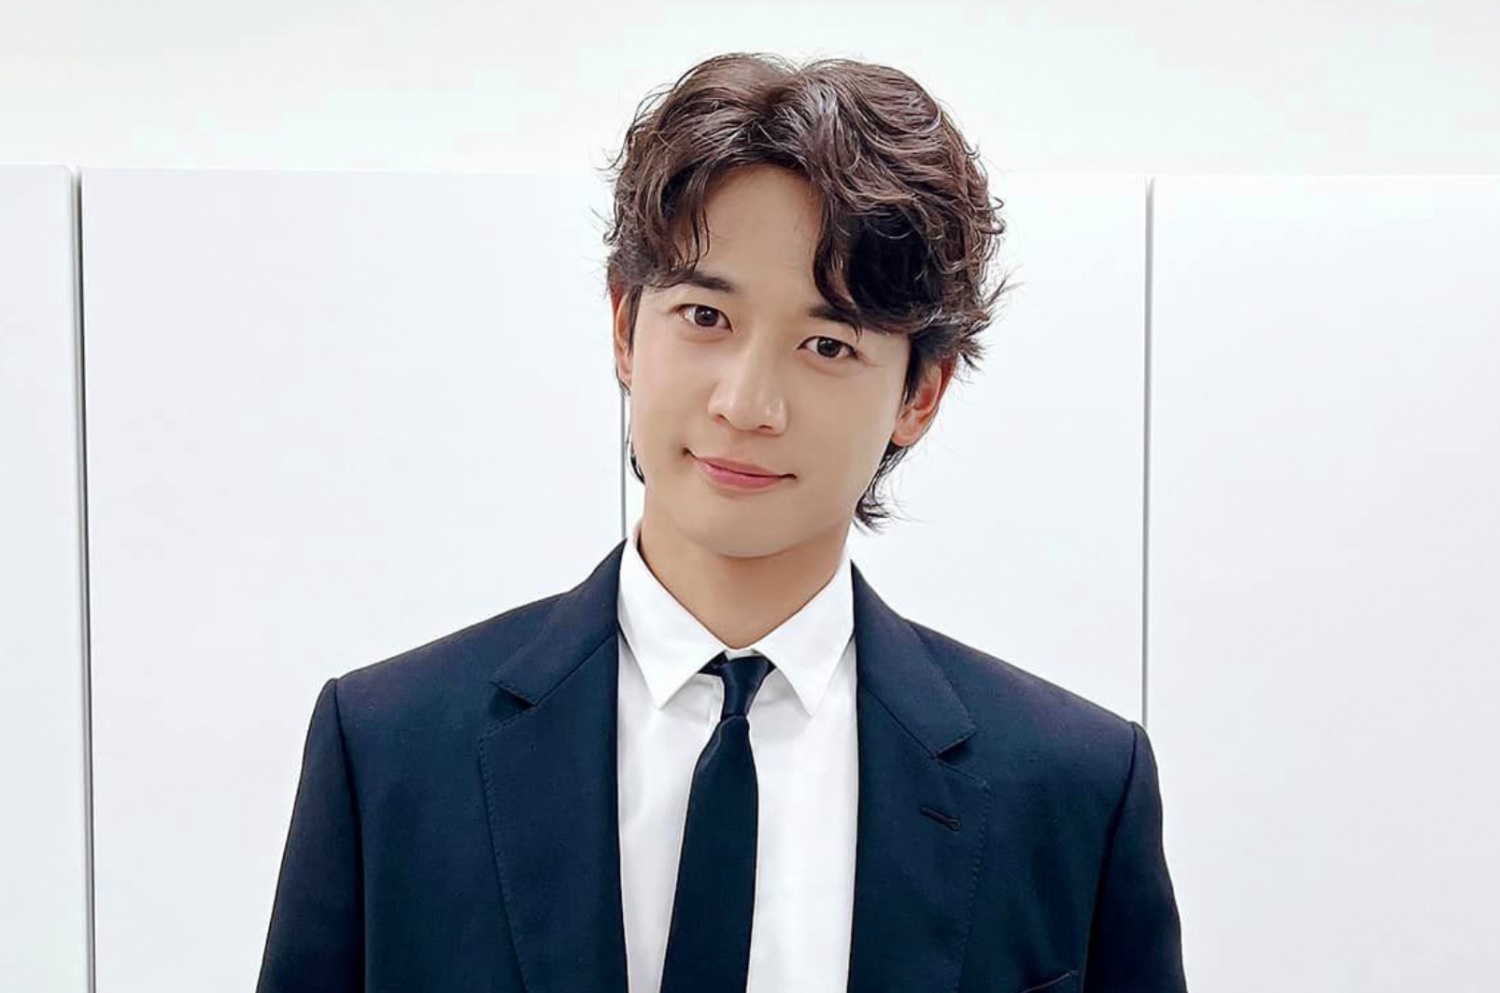 SHINee Minho announced that he will be releasing a solo album this month + SM replies